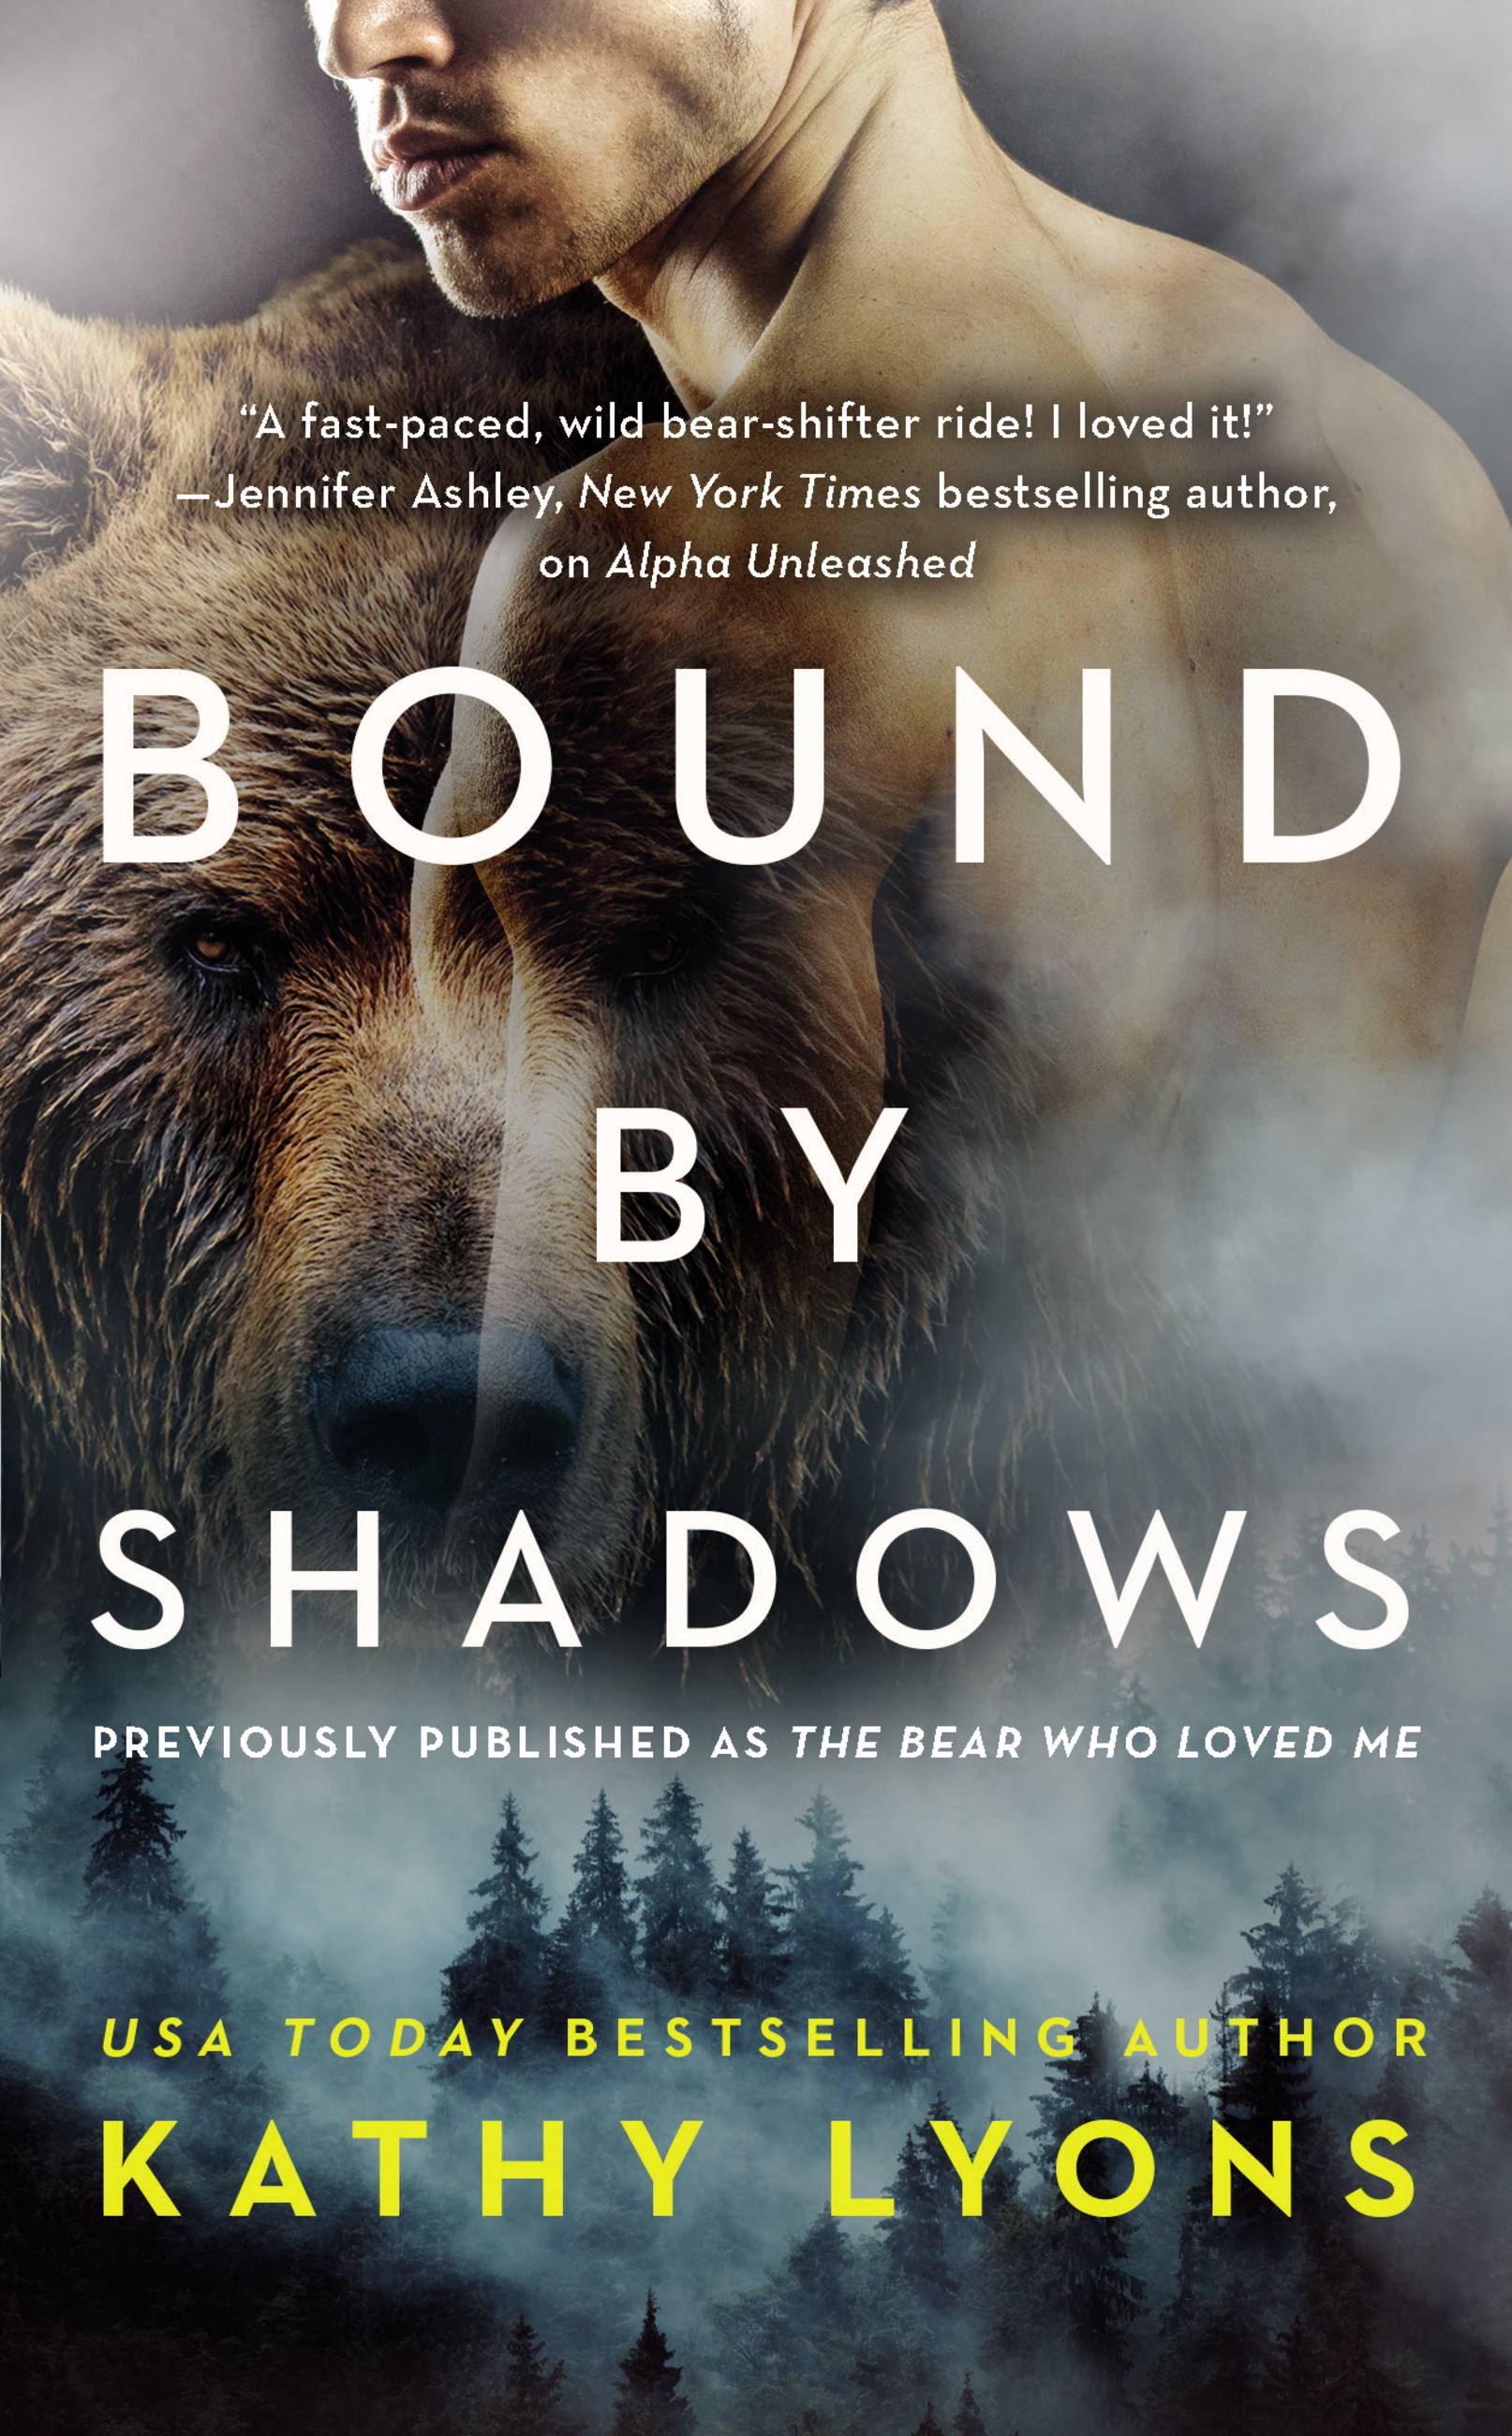 Bound by Shadows (previously published as The Bear Who Loved Me) by Kathy Lyons Hachette Book Group picture